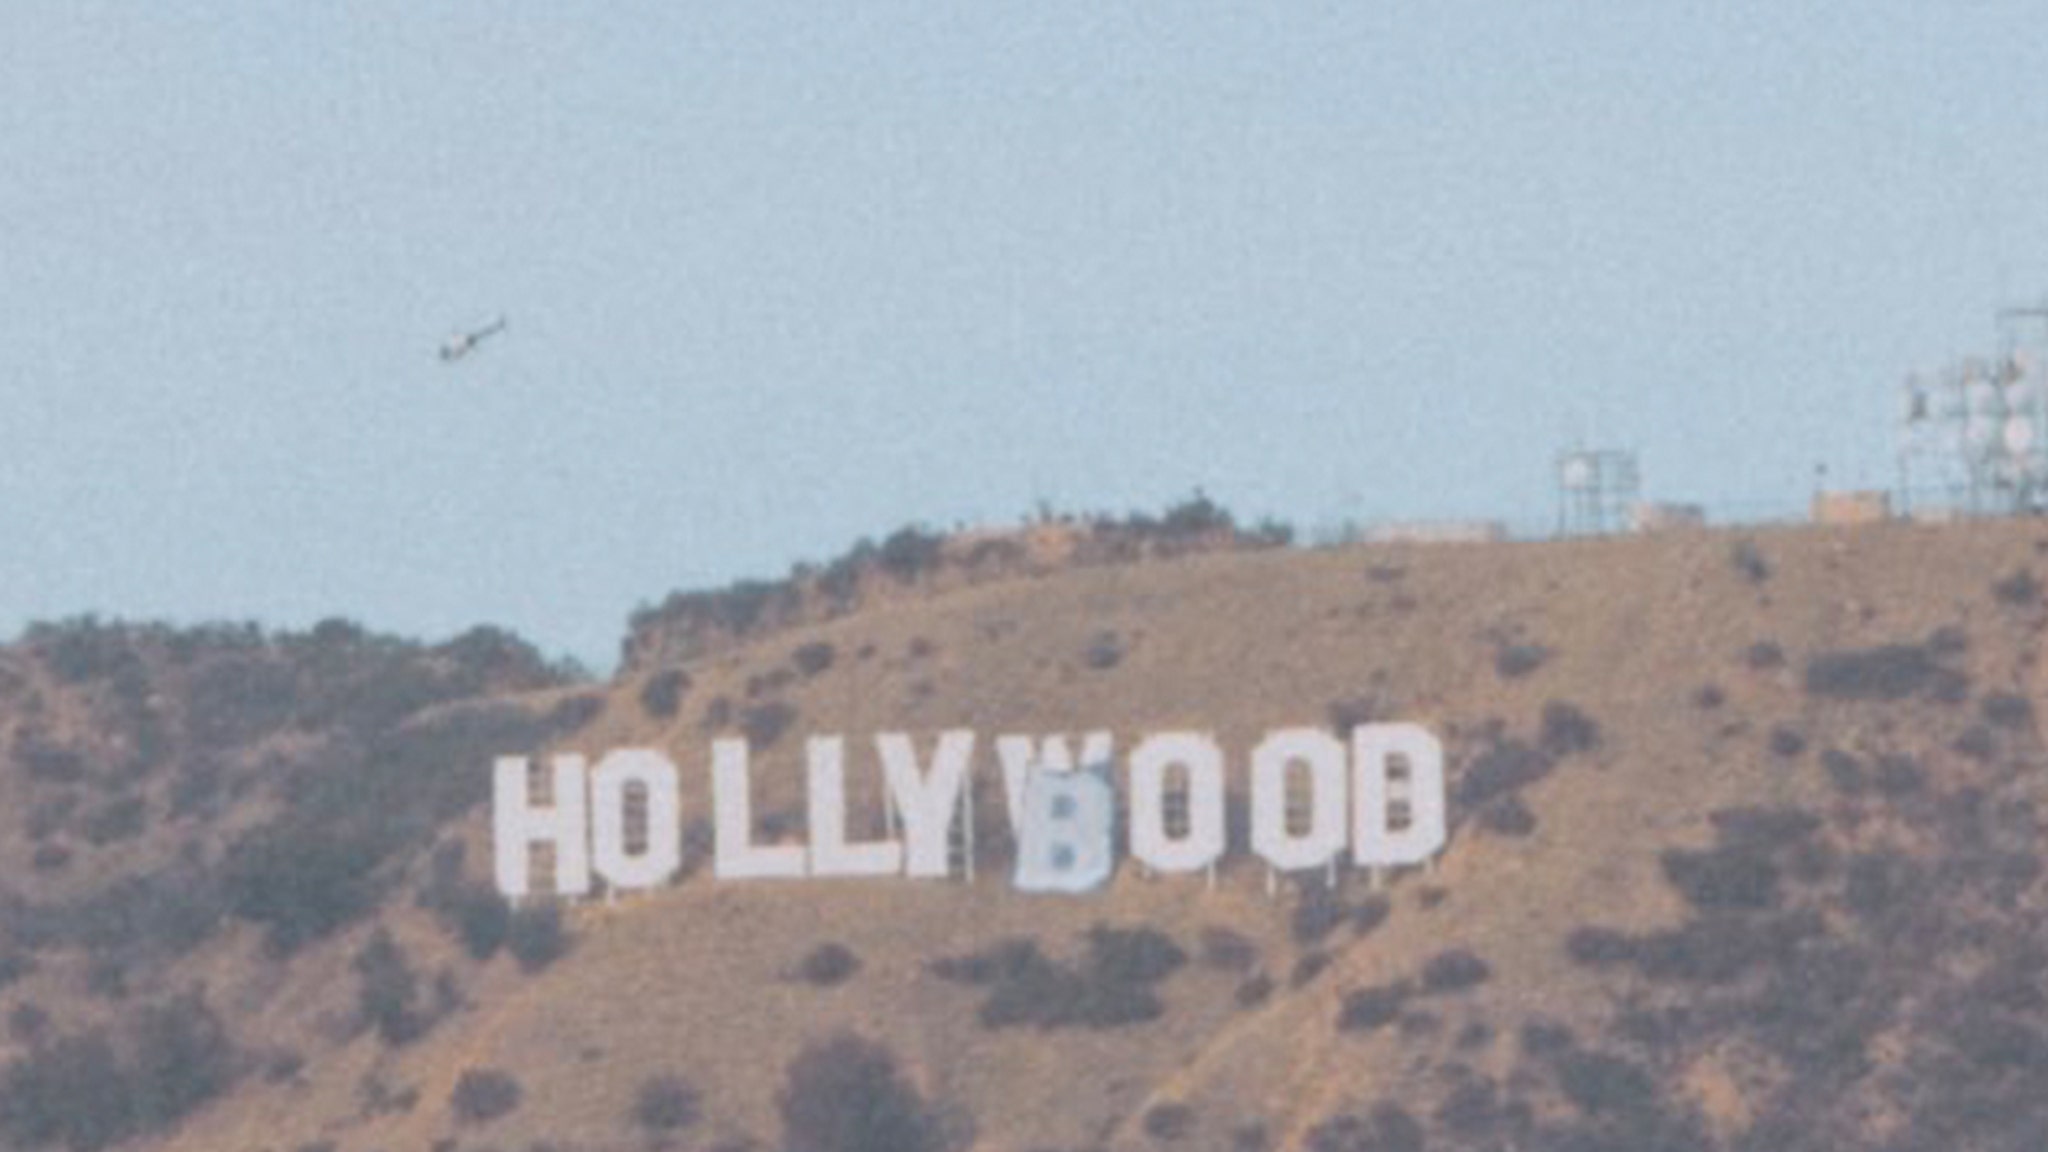 Hollywood sign changes to ‘Hollyboob’ for illegal breast cancer awareness